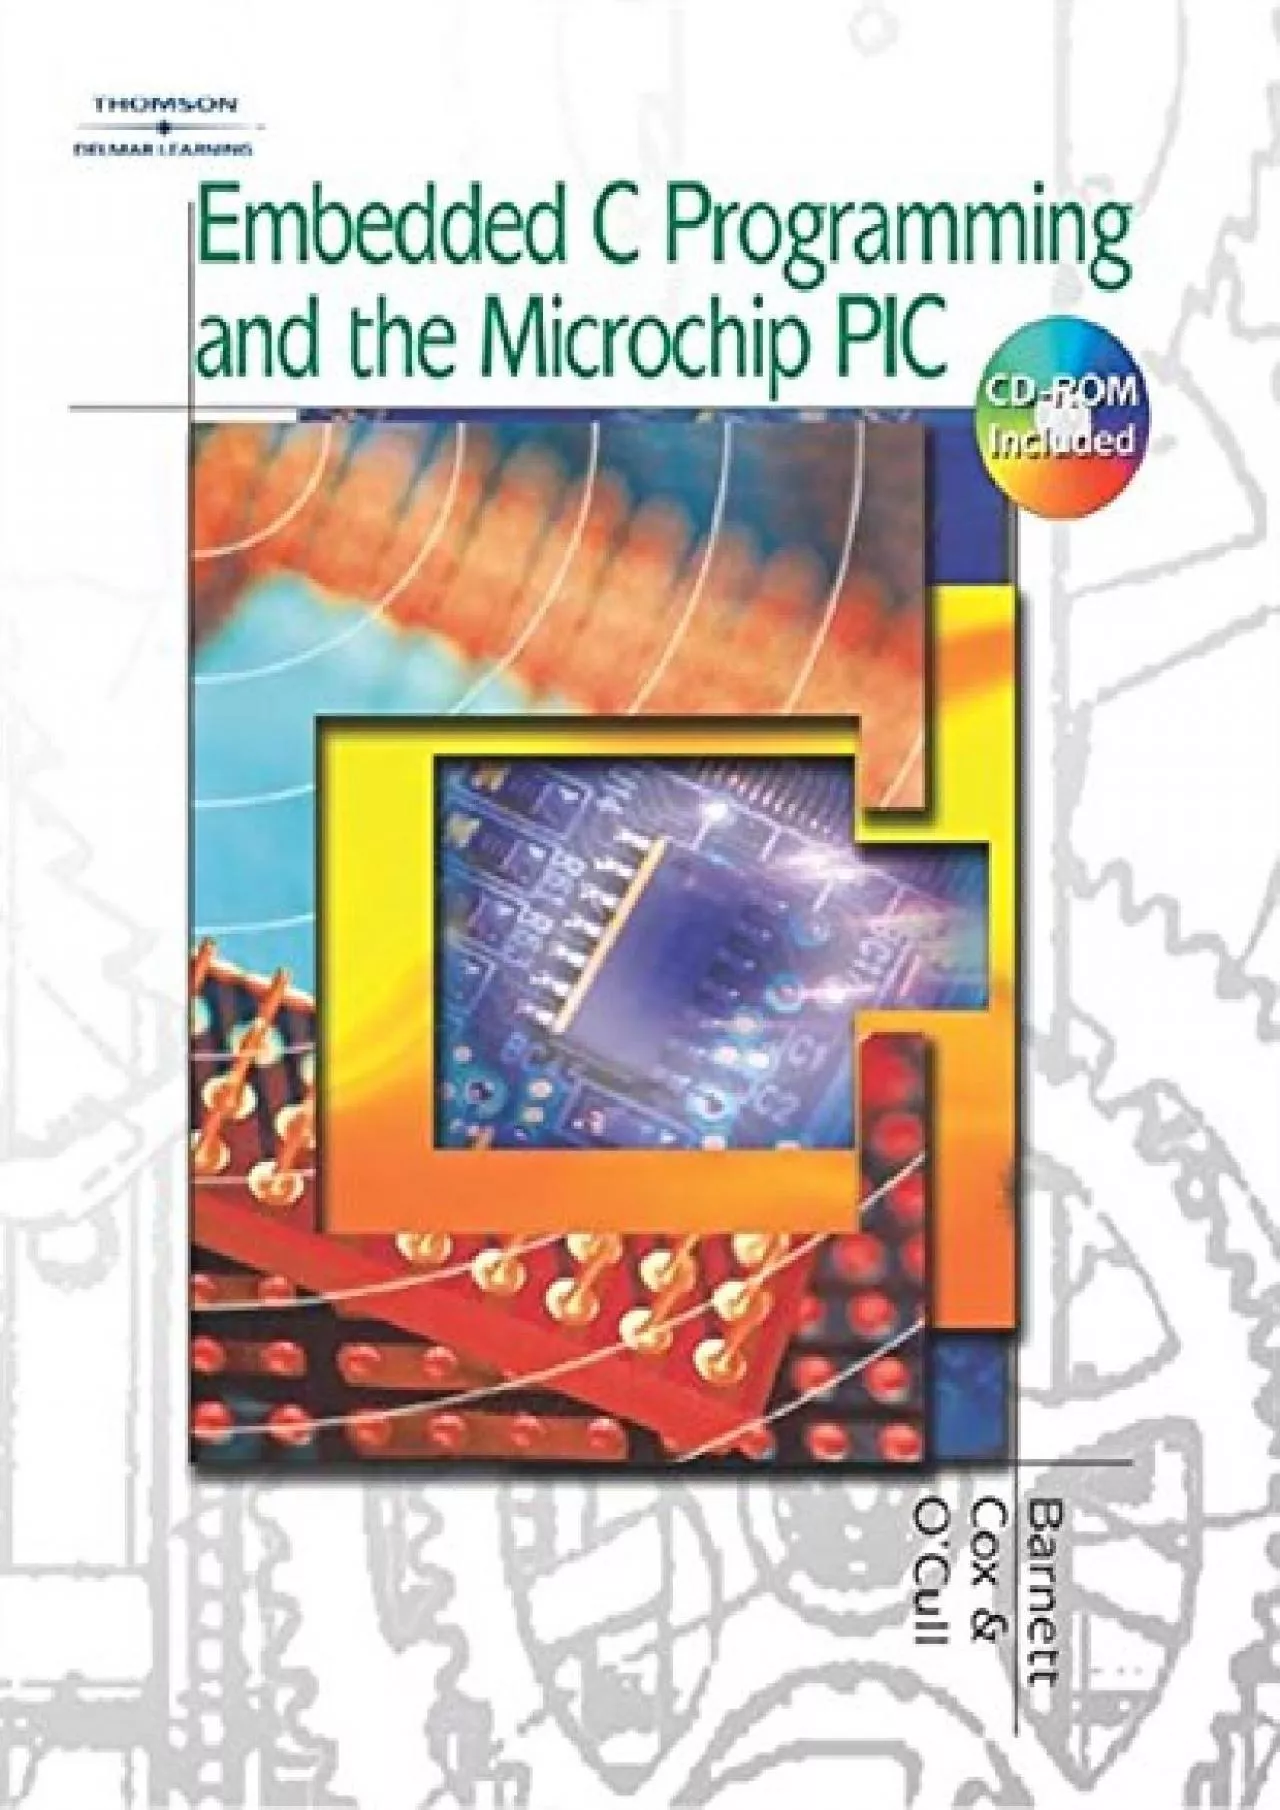 [READING BOOK]-Embedded C Programming and the Microchip PIC